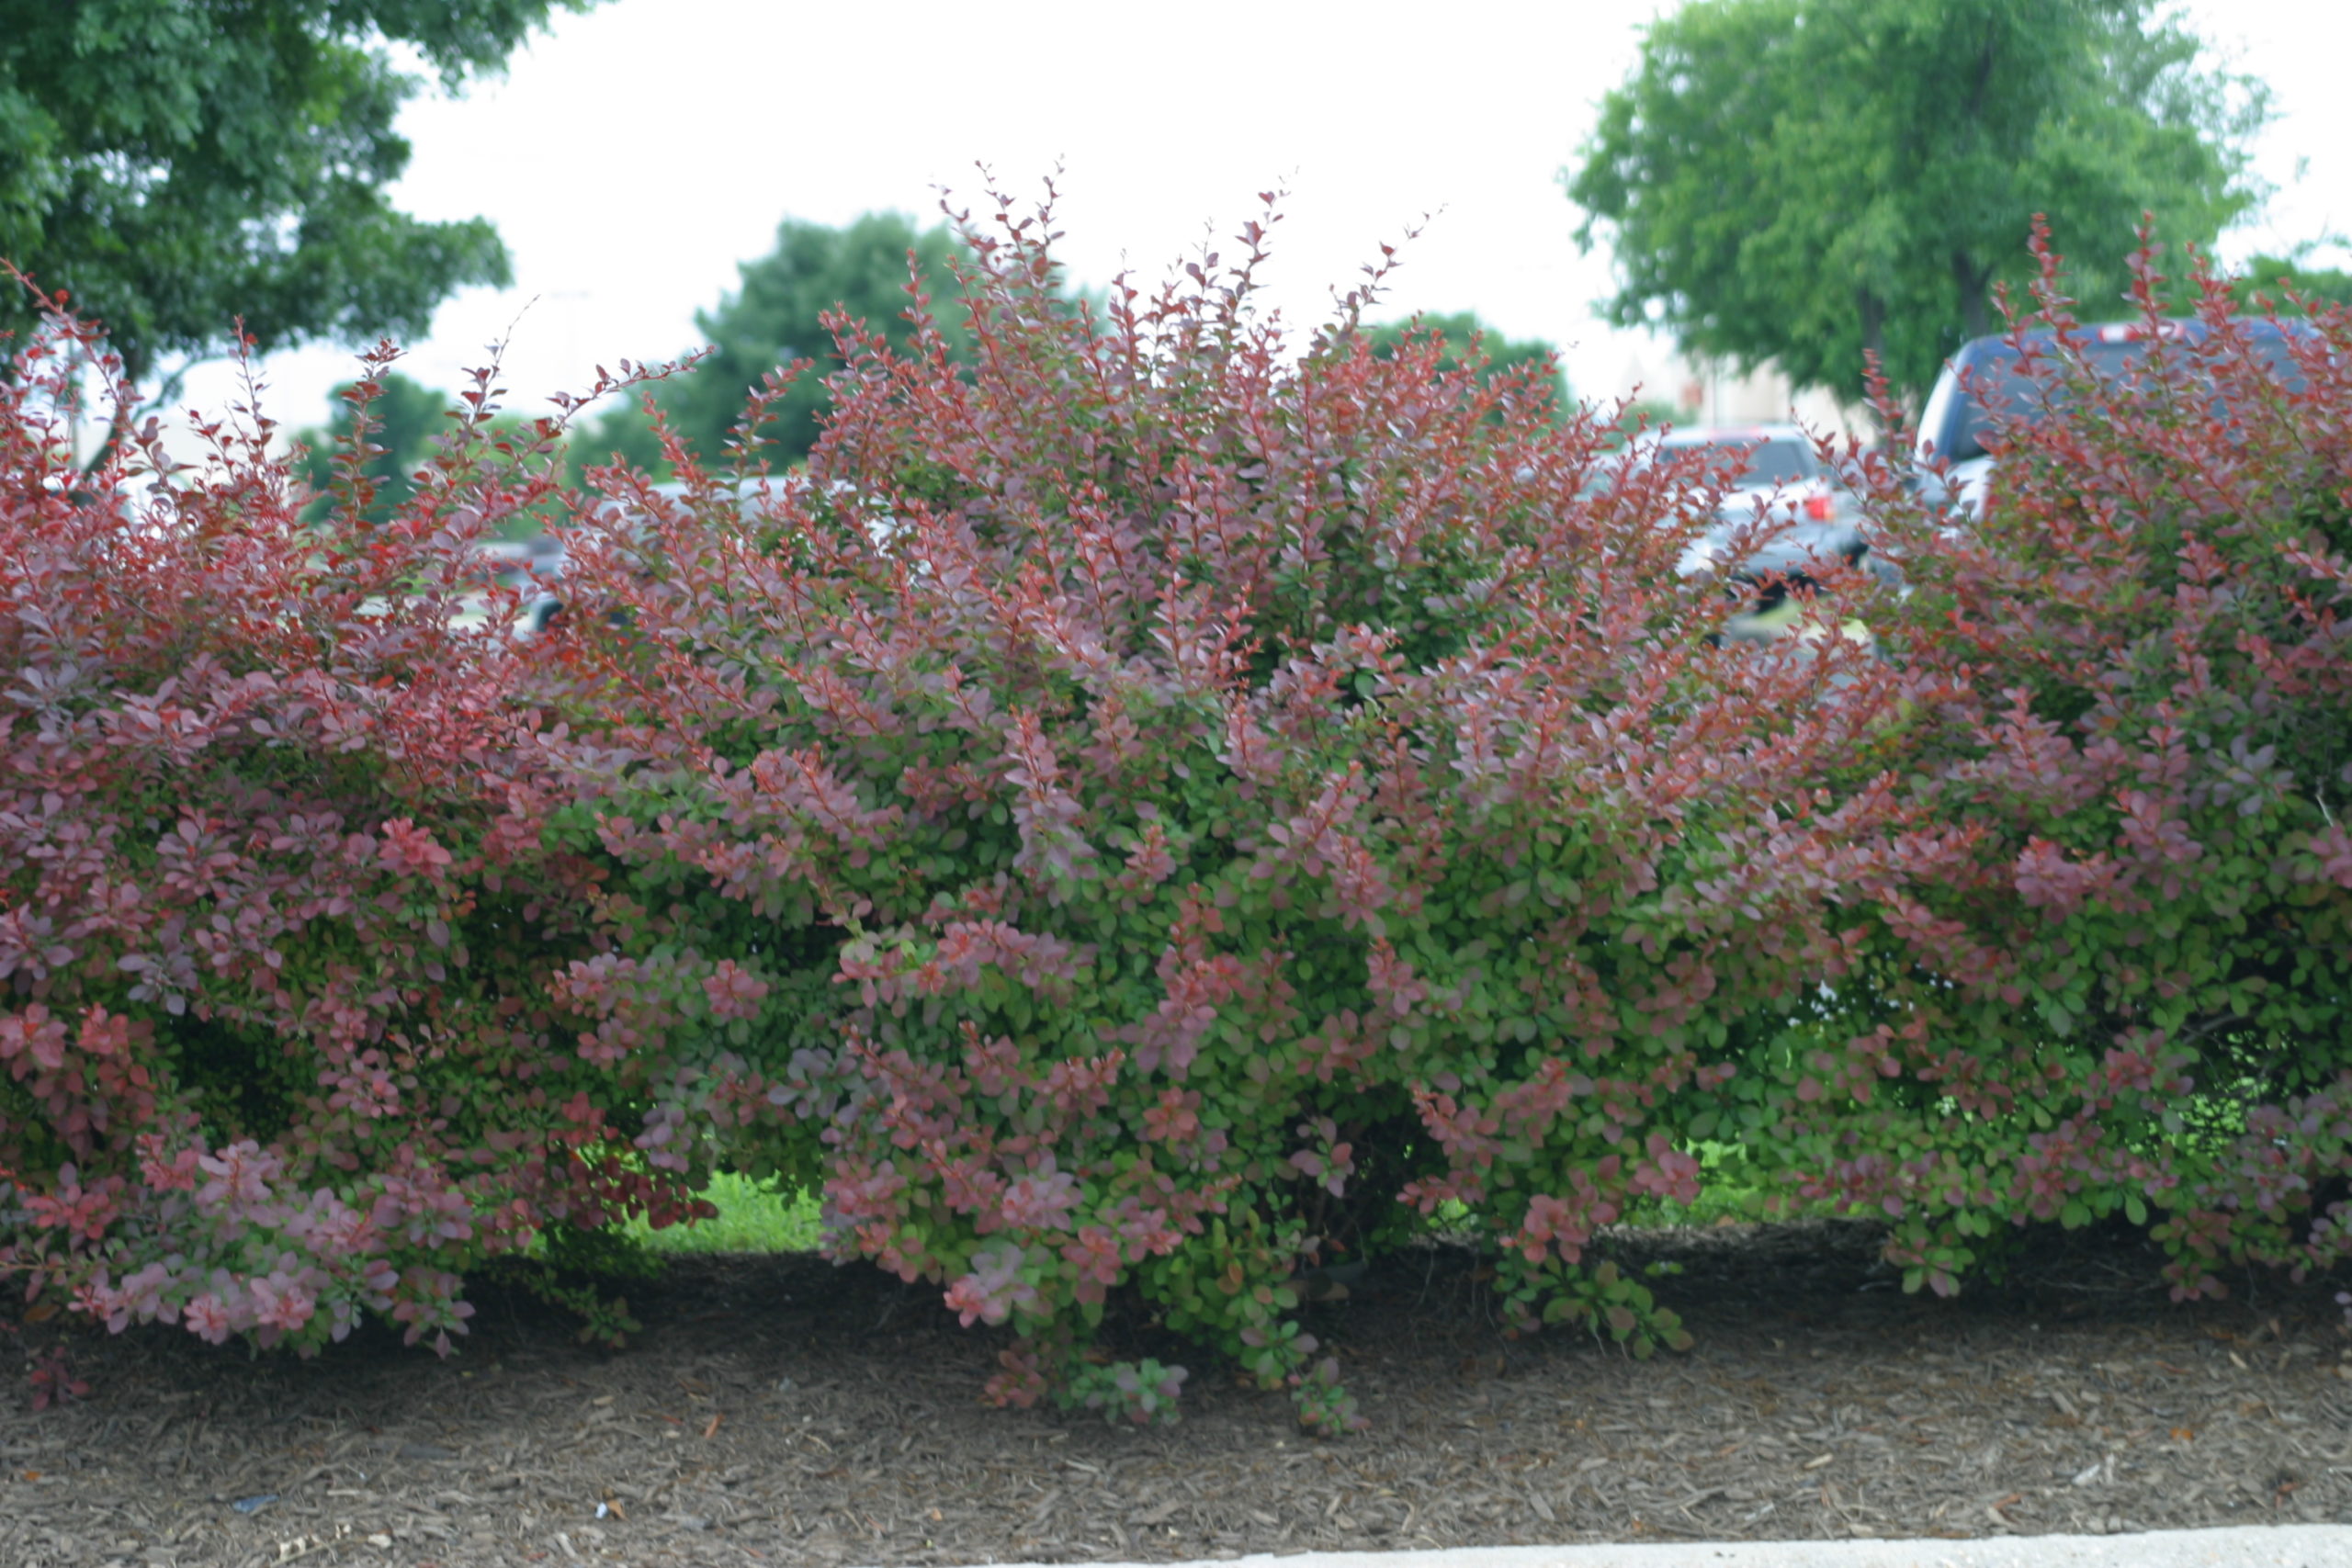 Barbary shrub with a natural pruning form